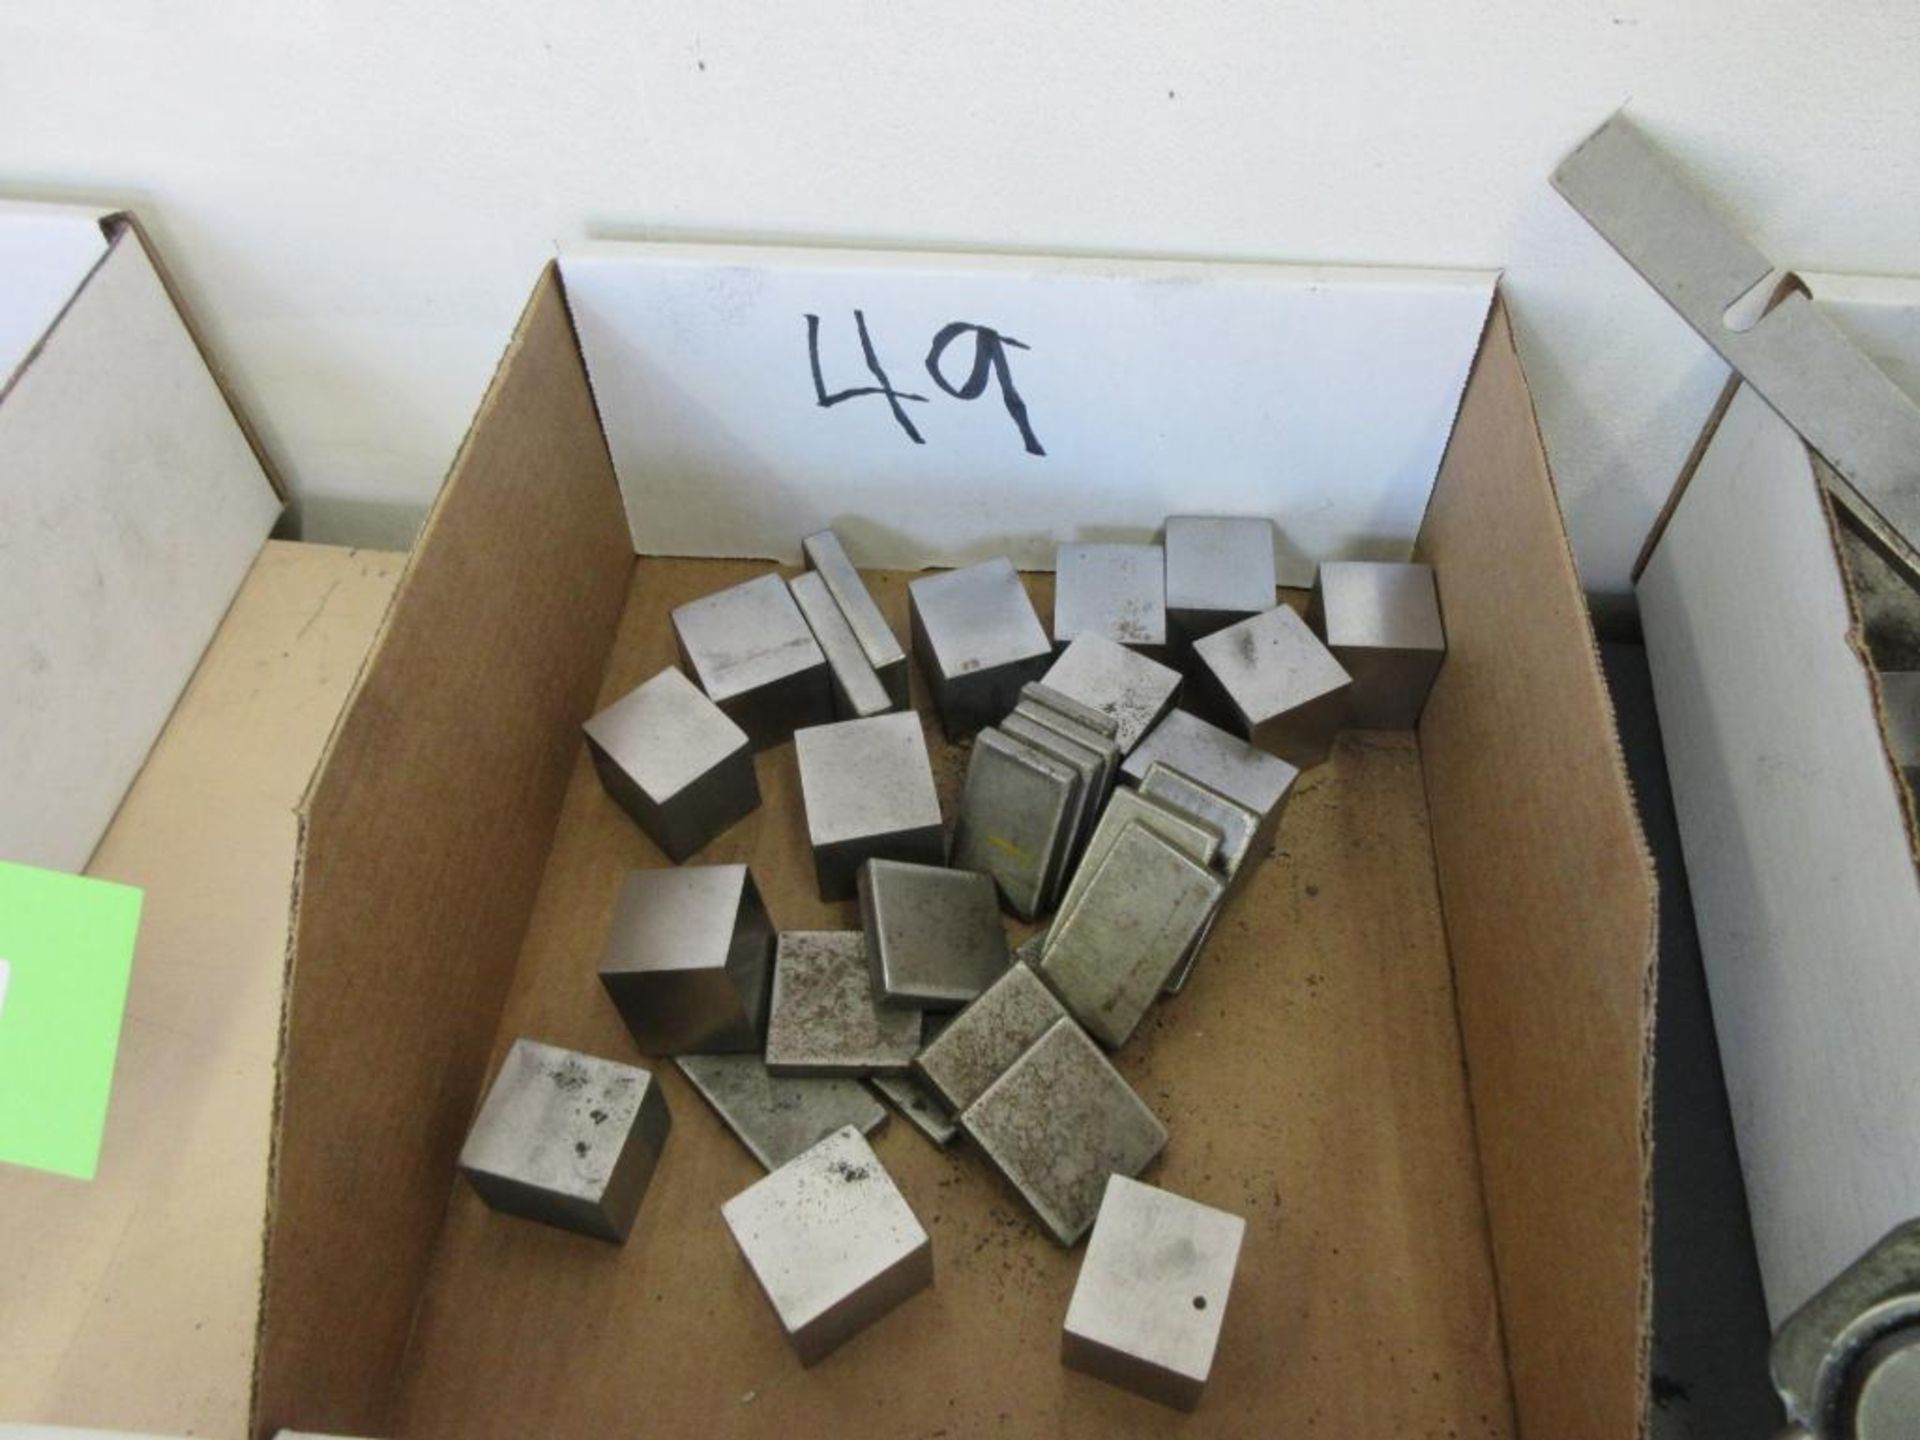 8 BOXES ASSOERTED PRECISION BLOCKS MAGNETIC BASES, CLAMPS ETC - Image 7 of 8